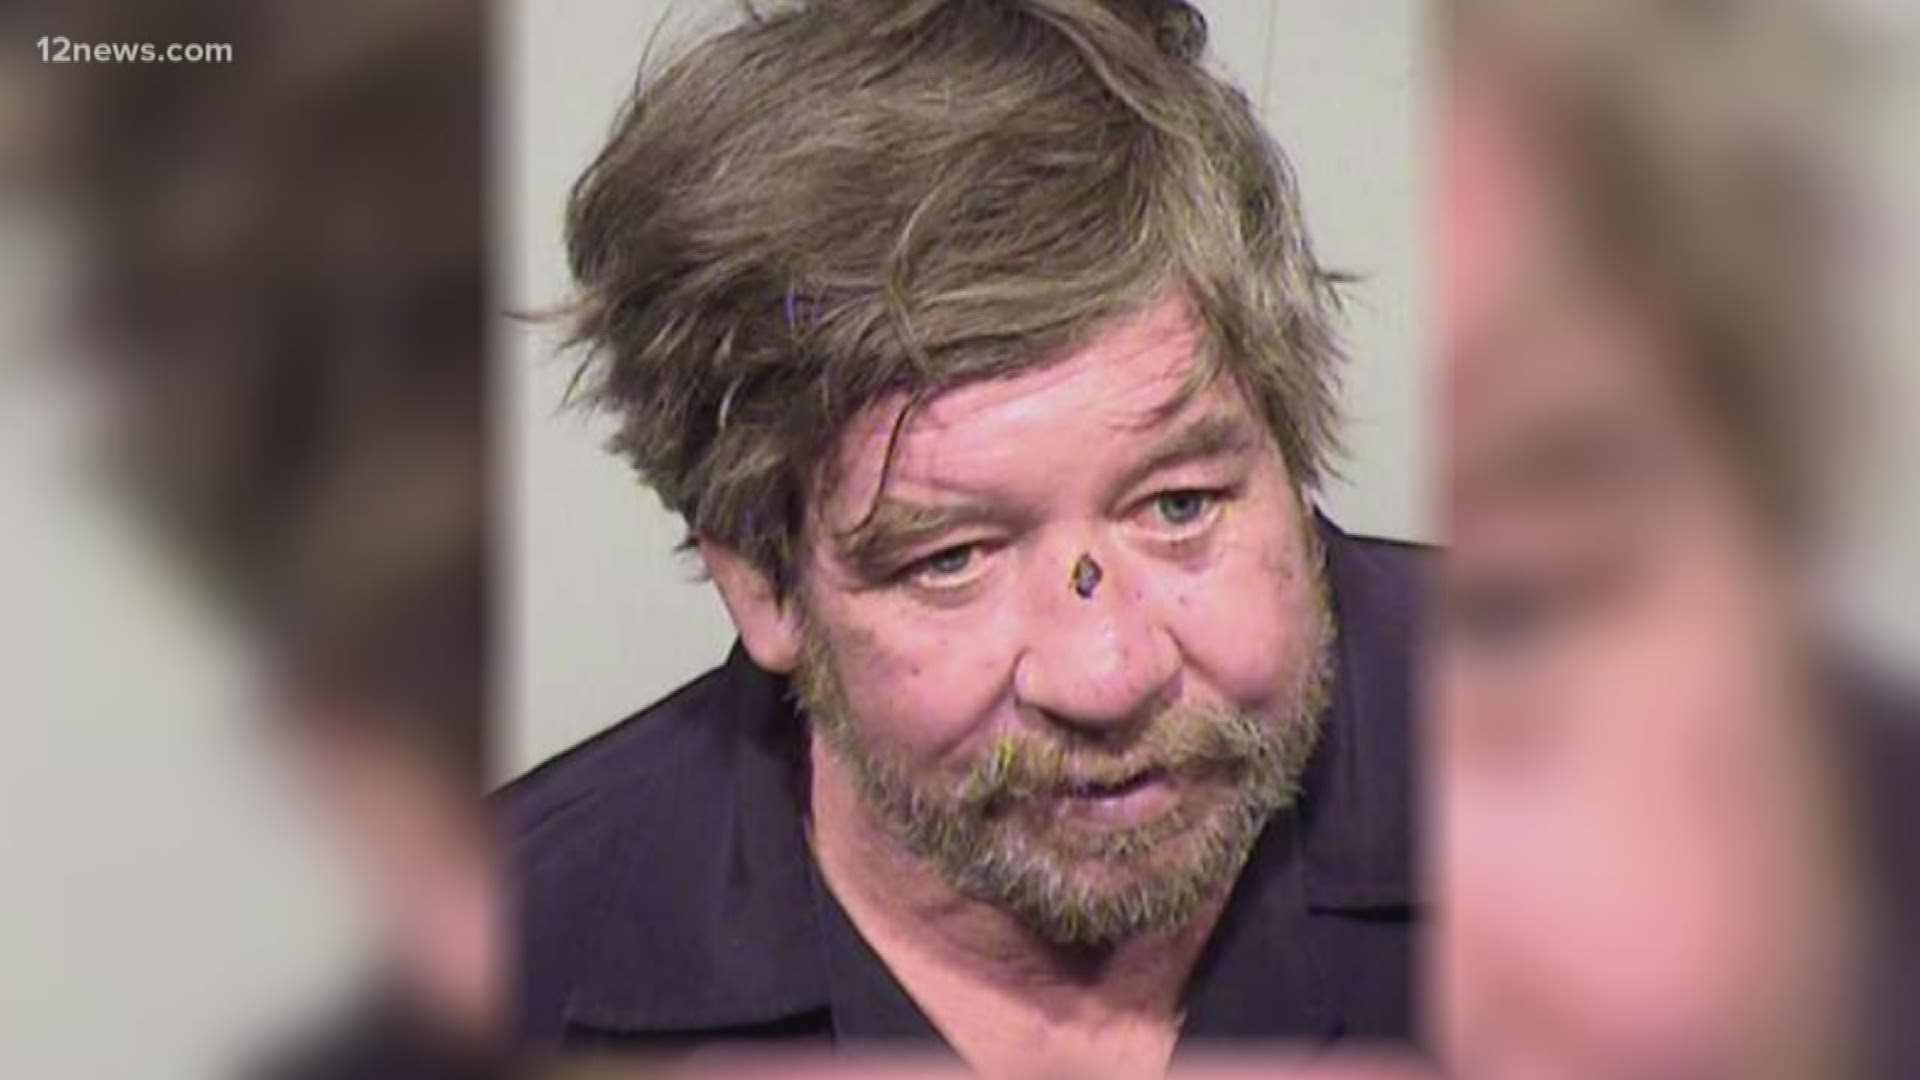 A Tempe man was arrested this weekend for driving under the influence—but it wasn't his first run-in with the law.